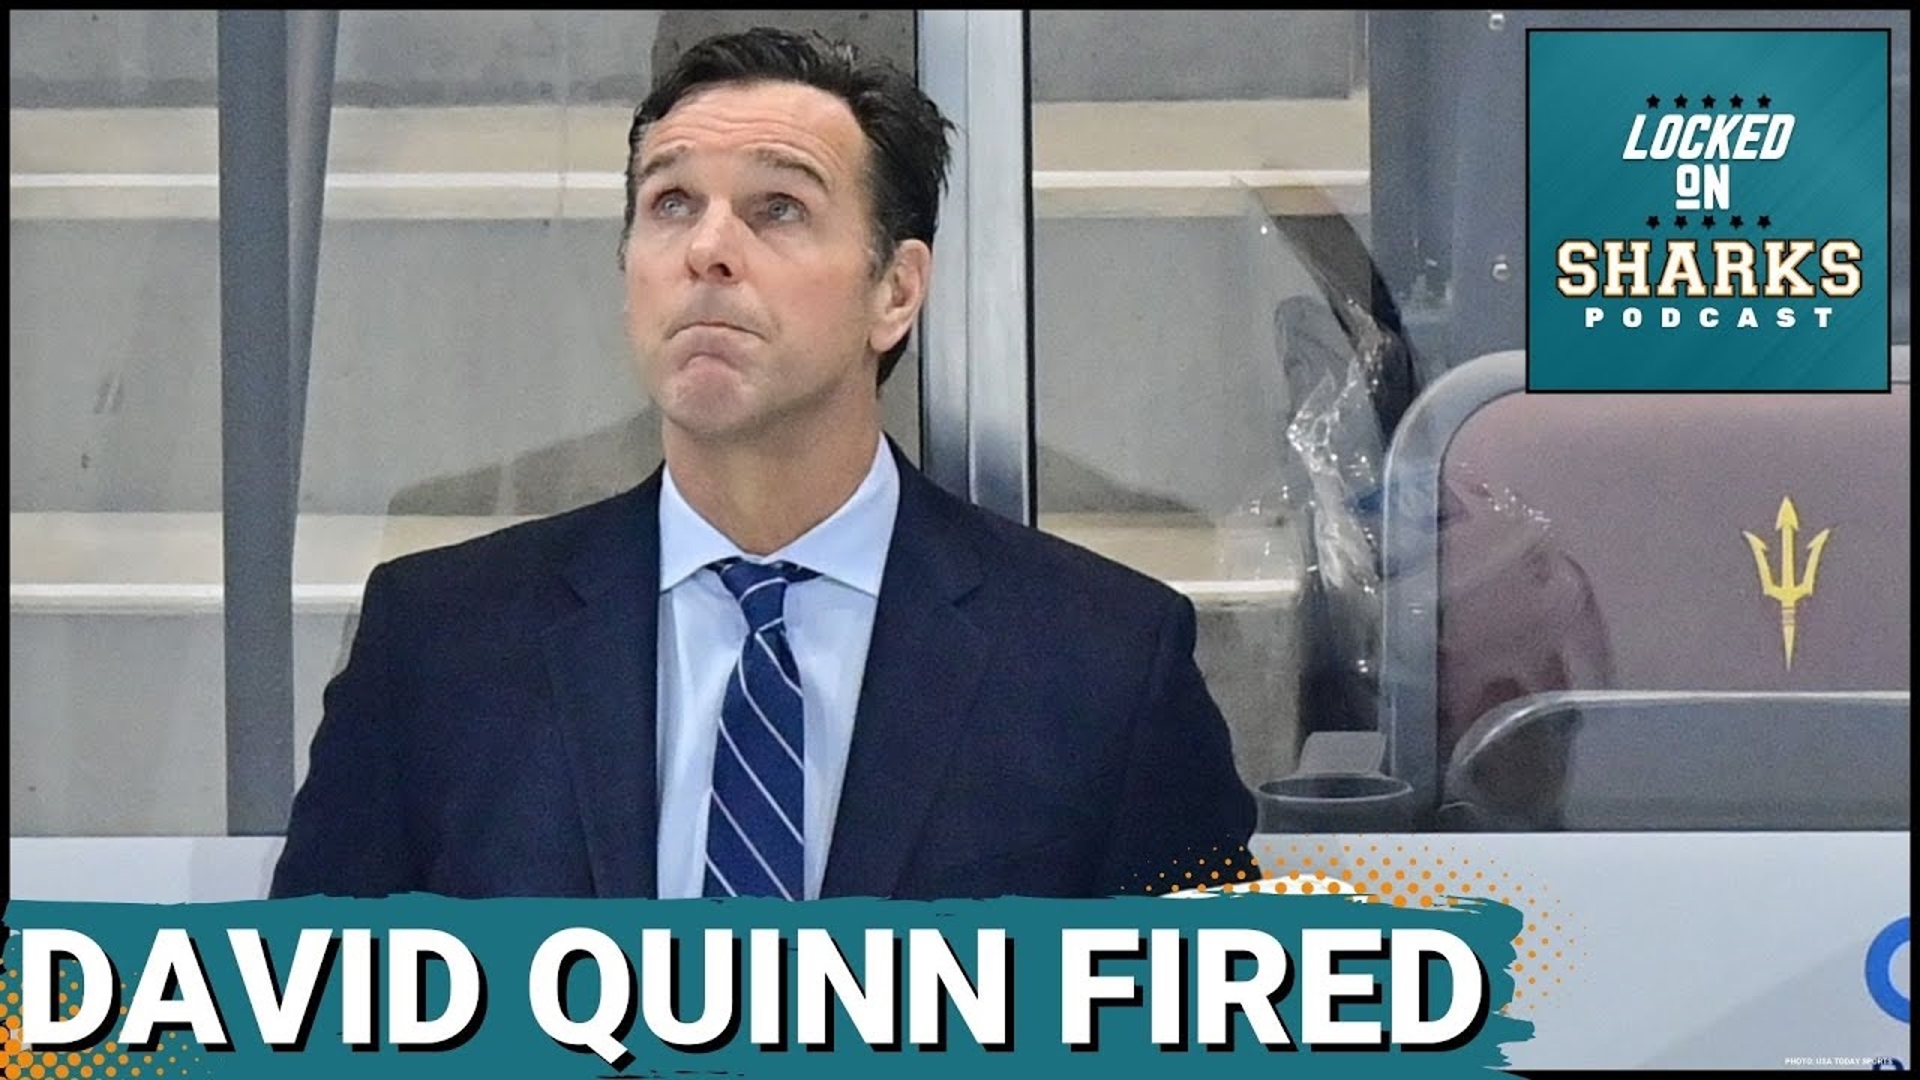 The San Jose Sharks have fired Head Coach David Quinn after two seasons.